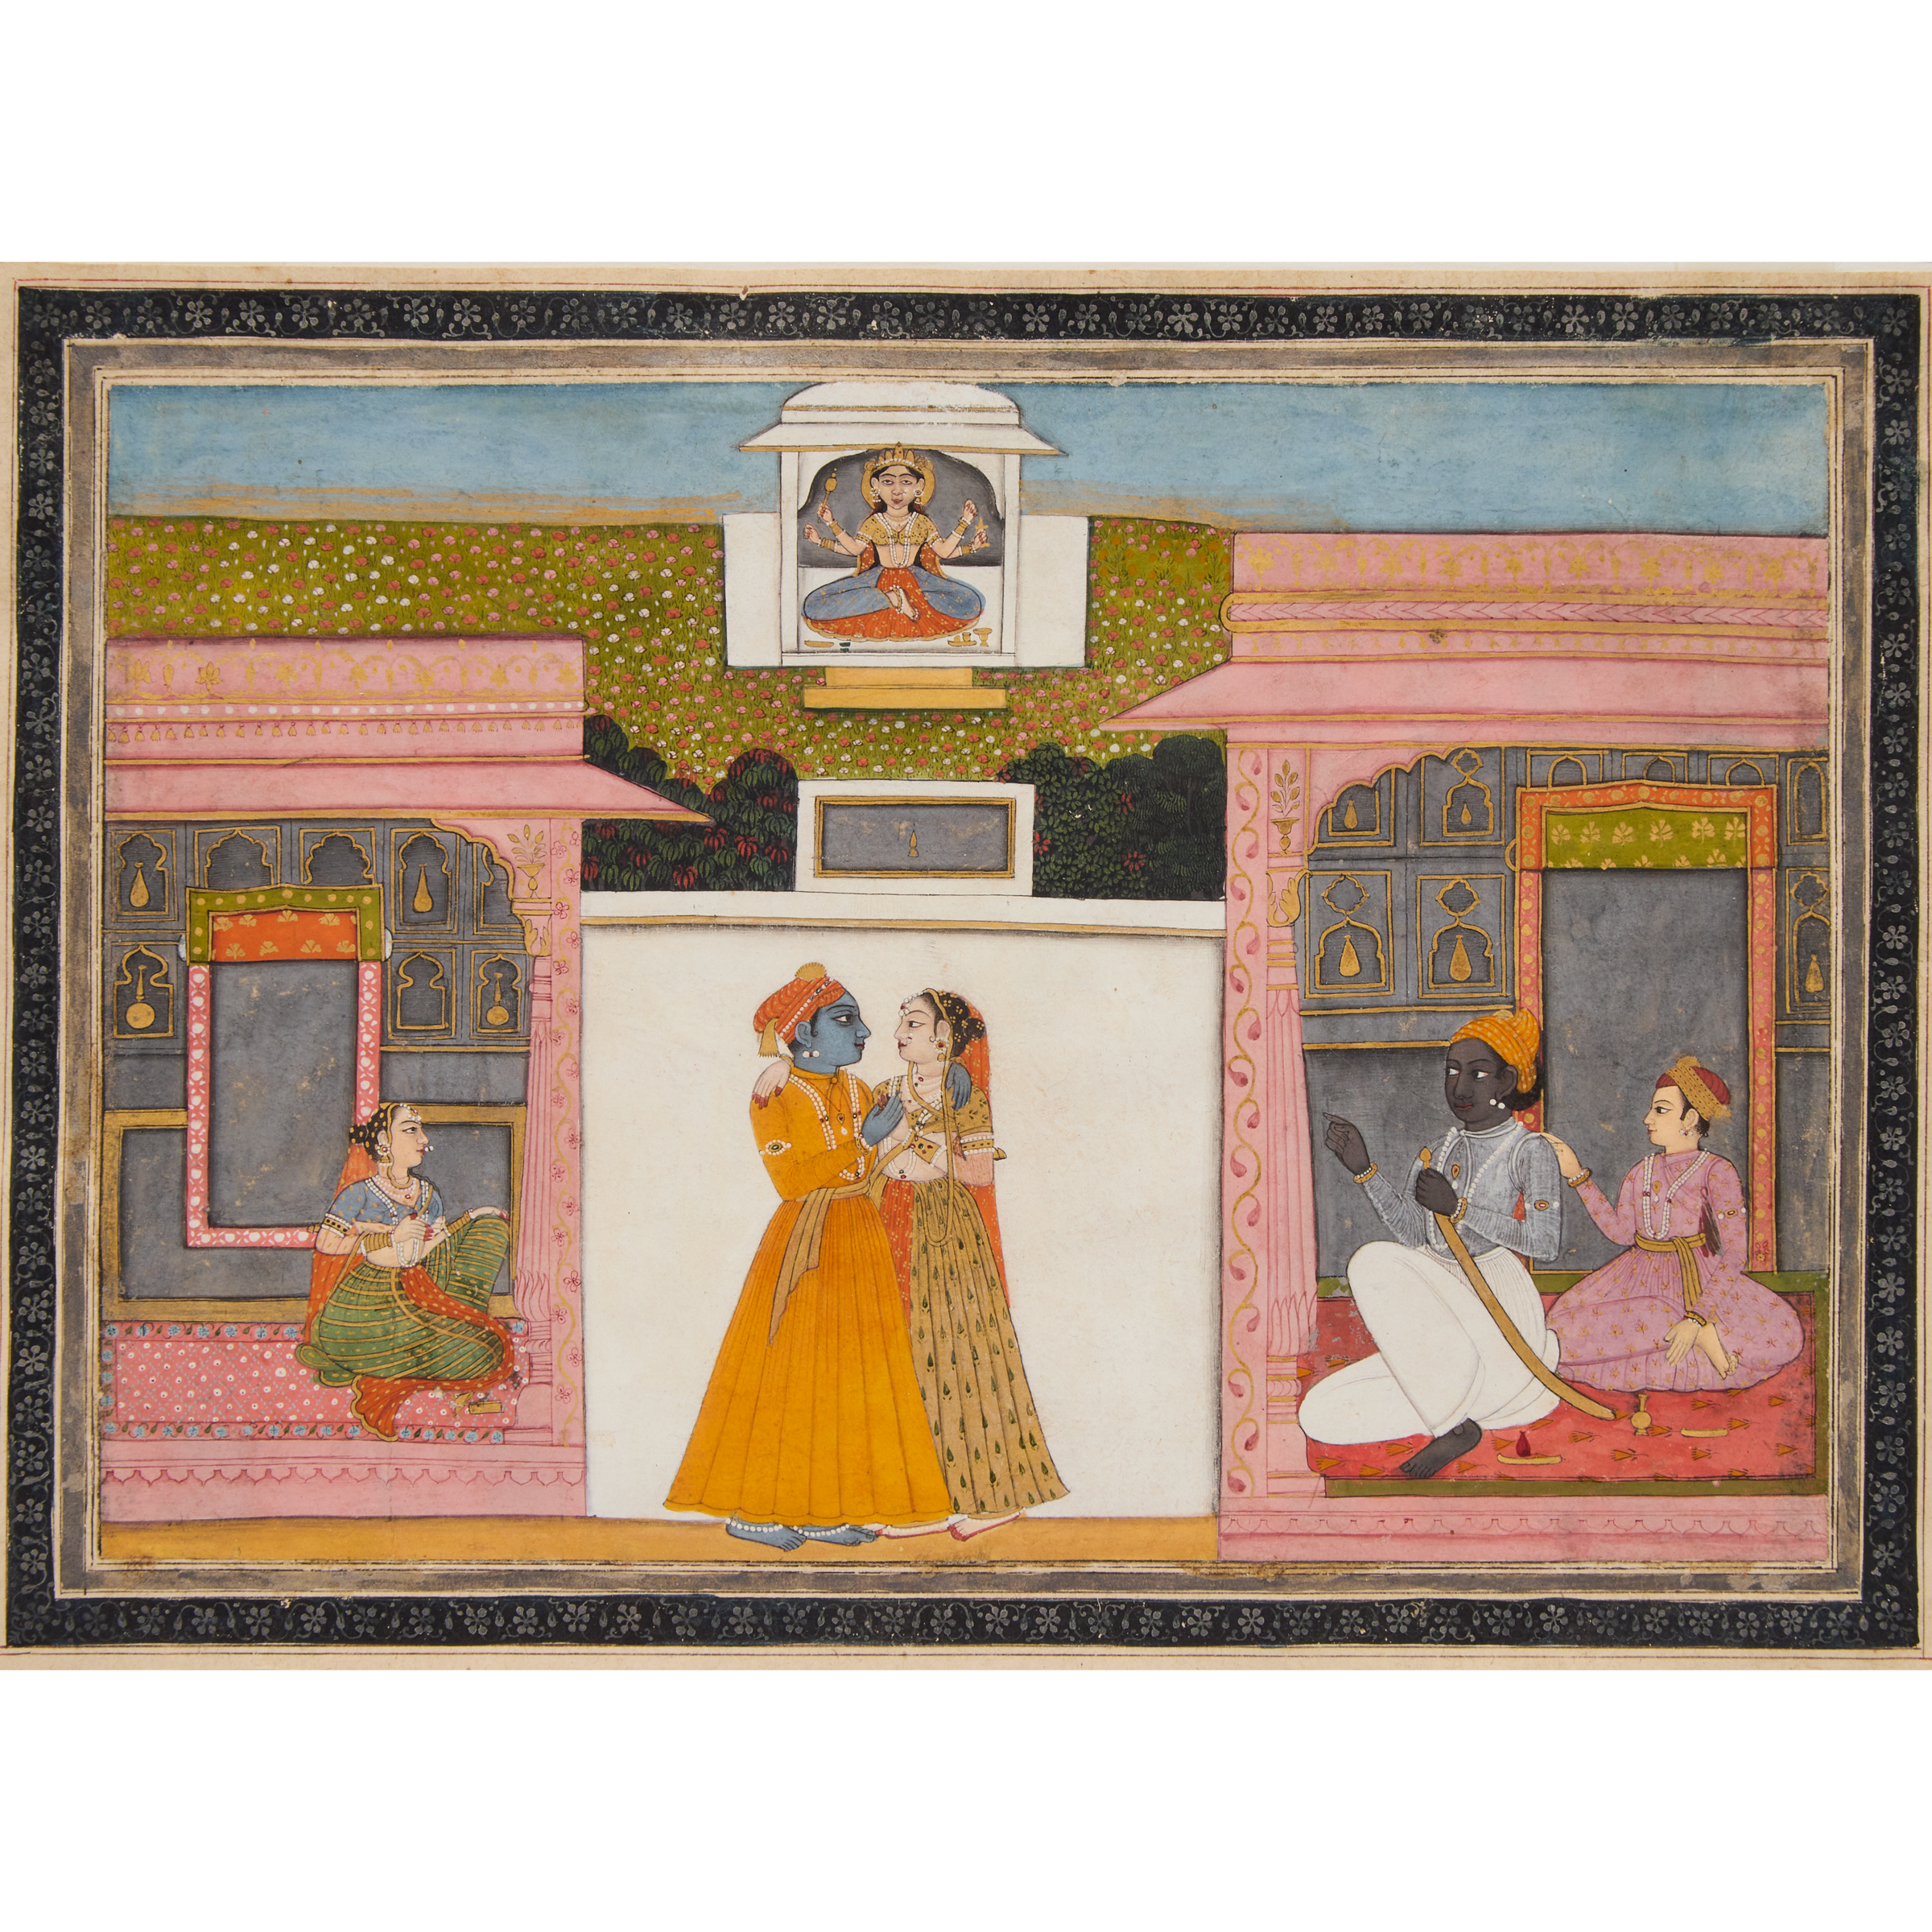 A Painting of Krishna and Radha,